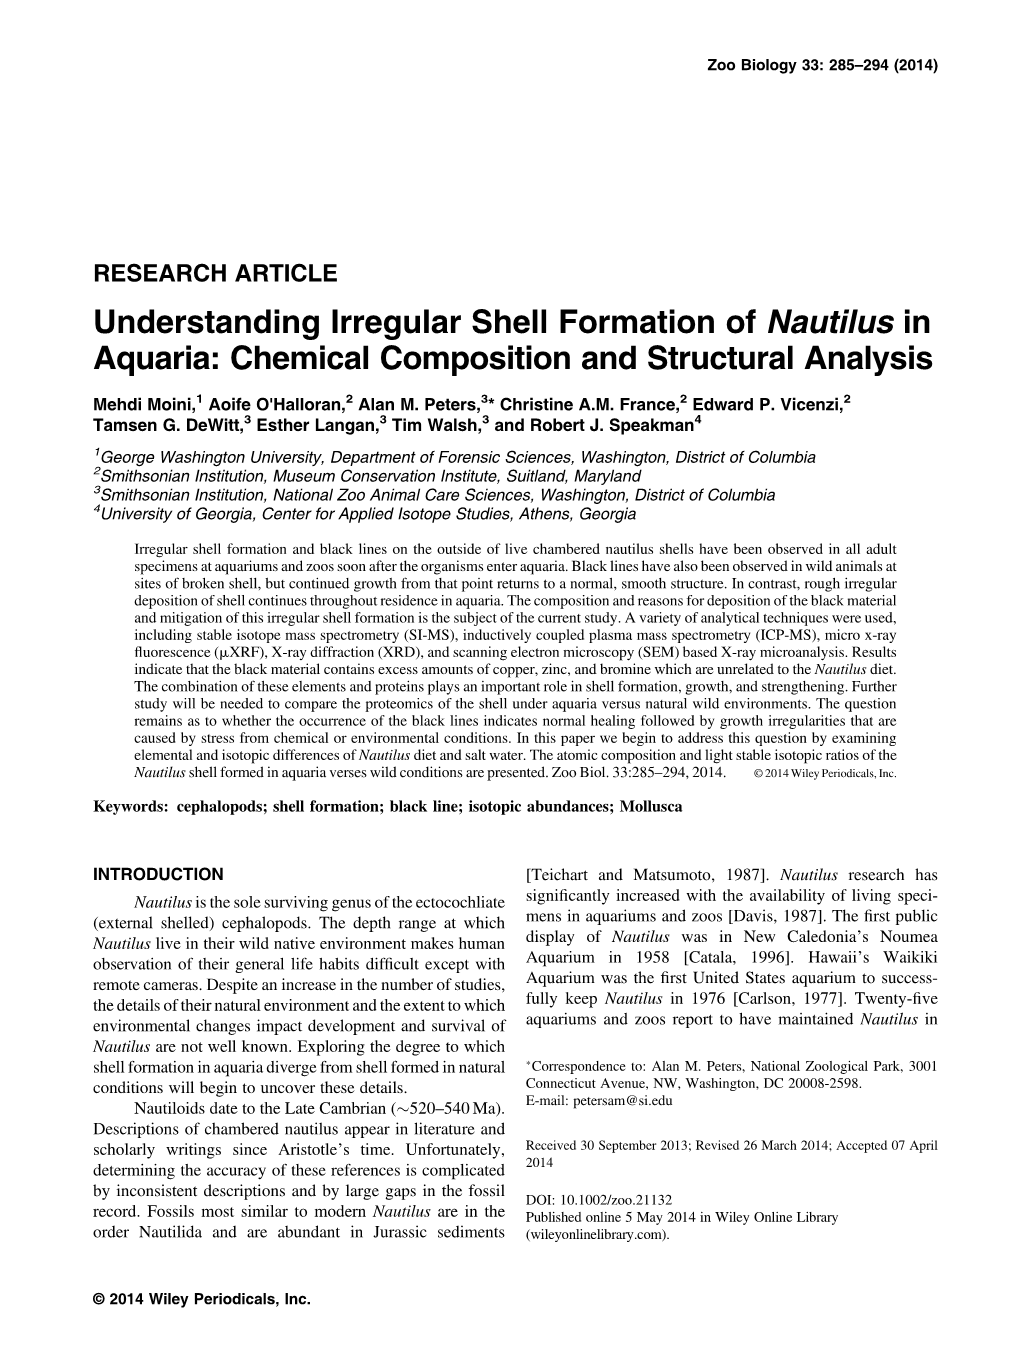 Understanding Irregular Shell Formation of Nautilus in Aquaria: Chemical Composition and Structural Analysis